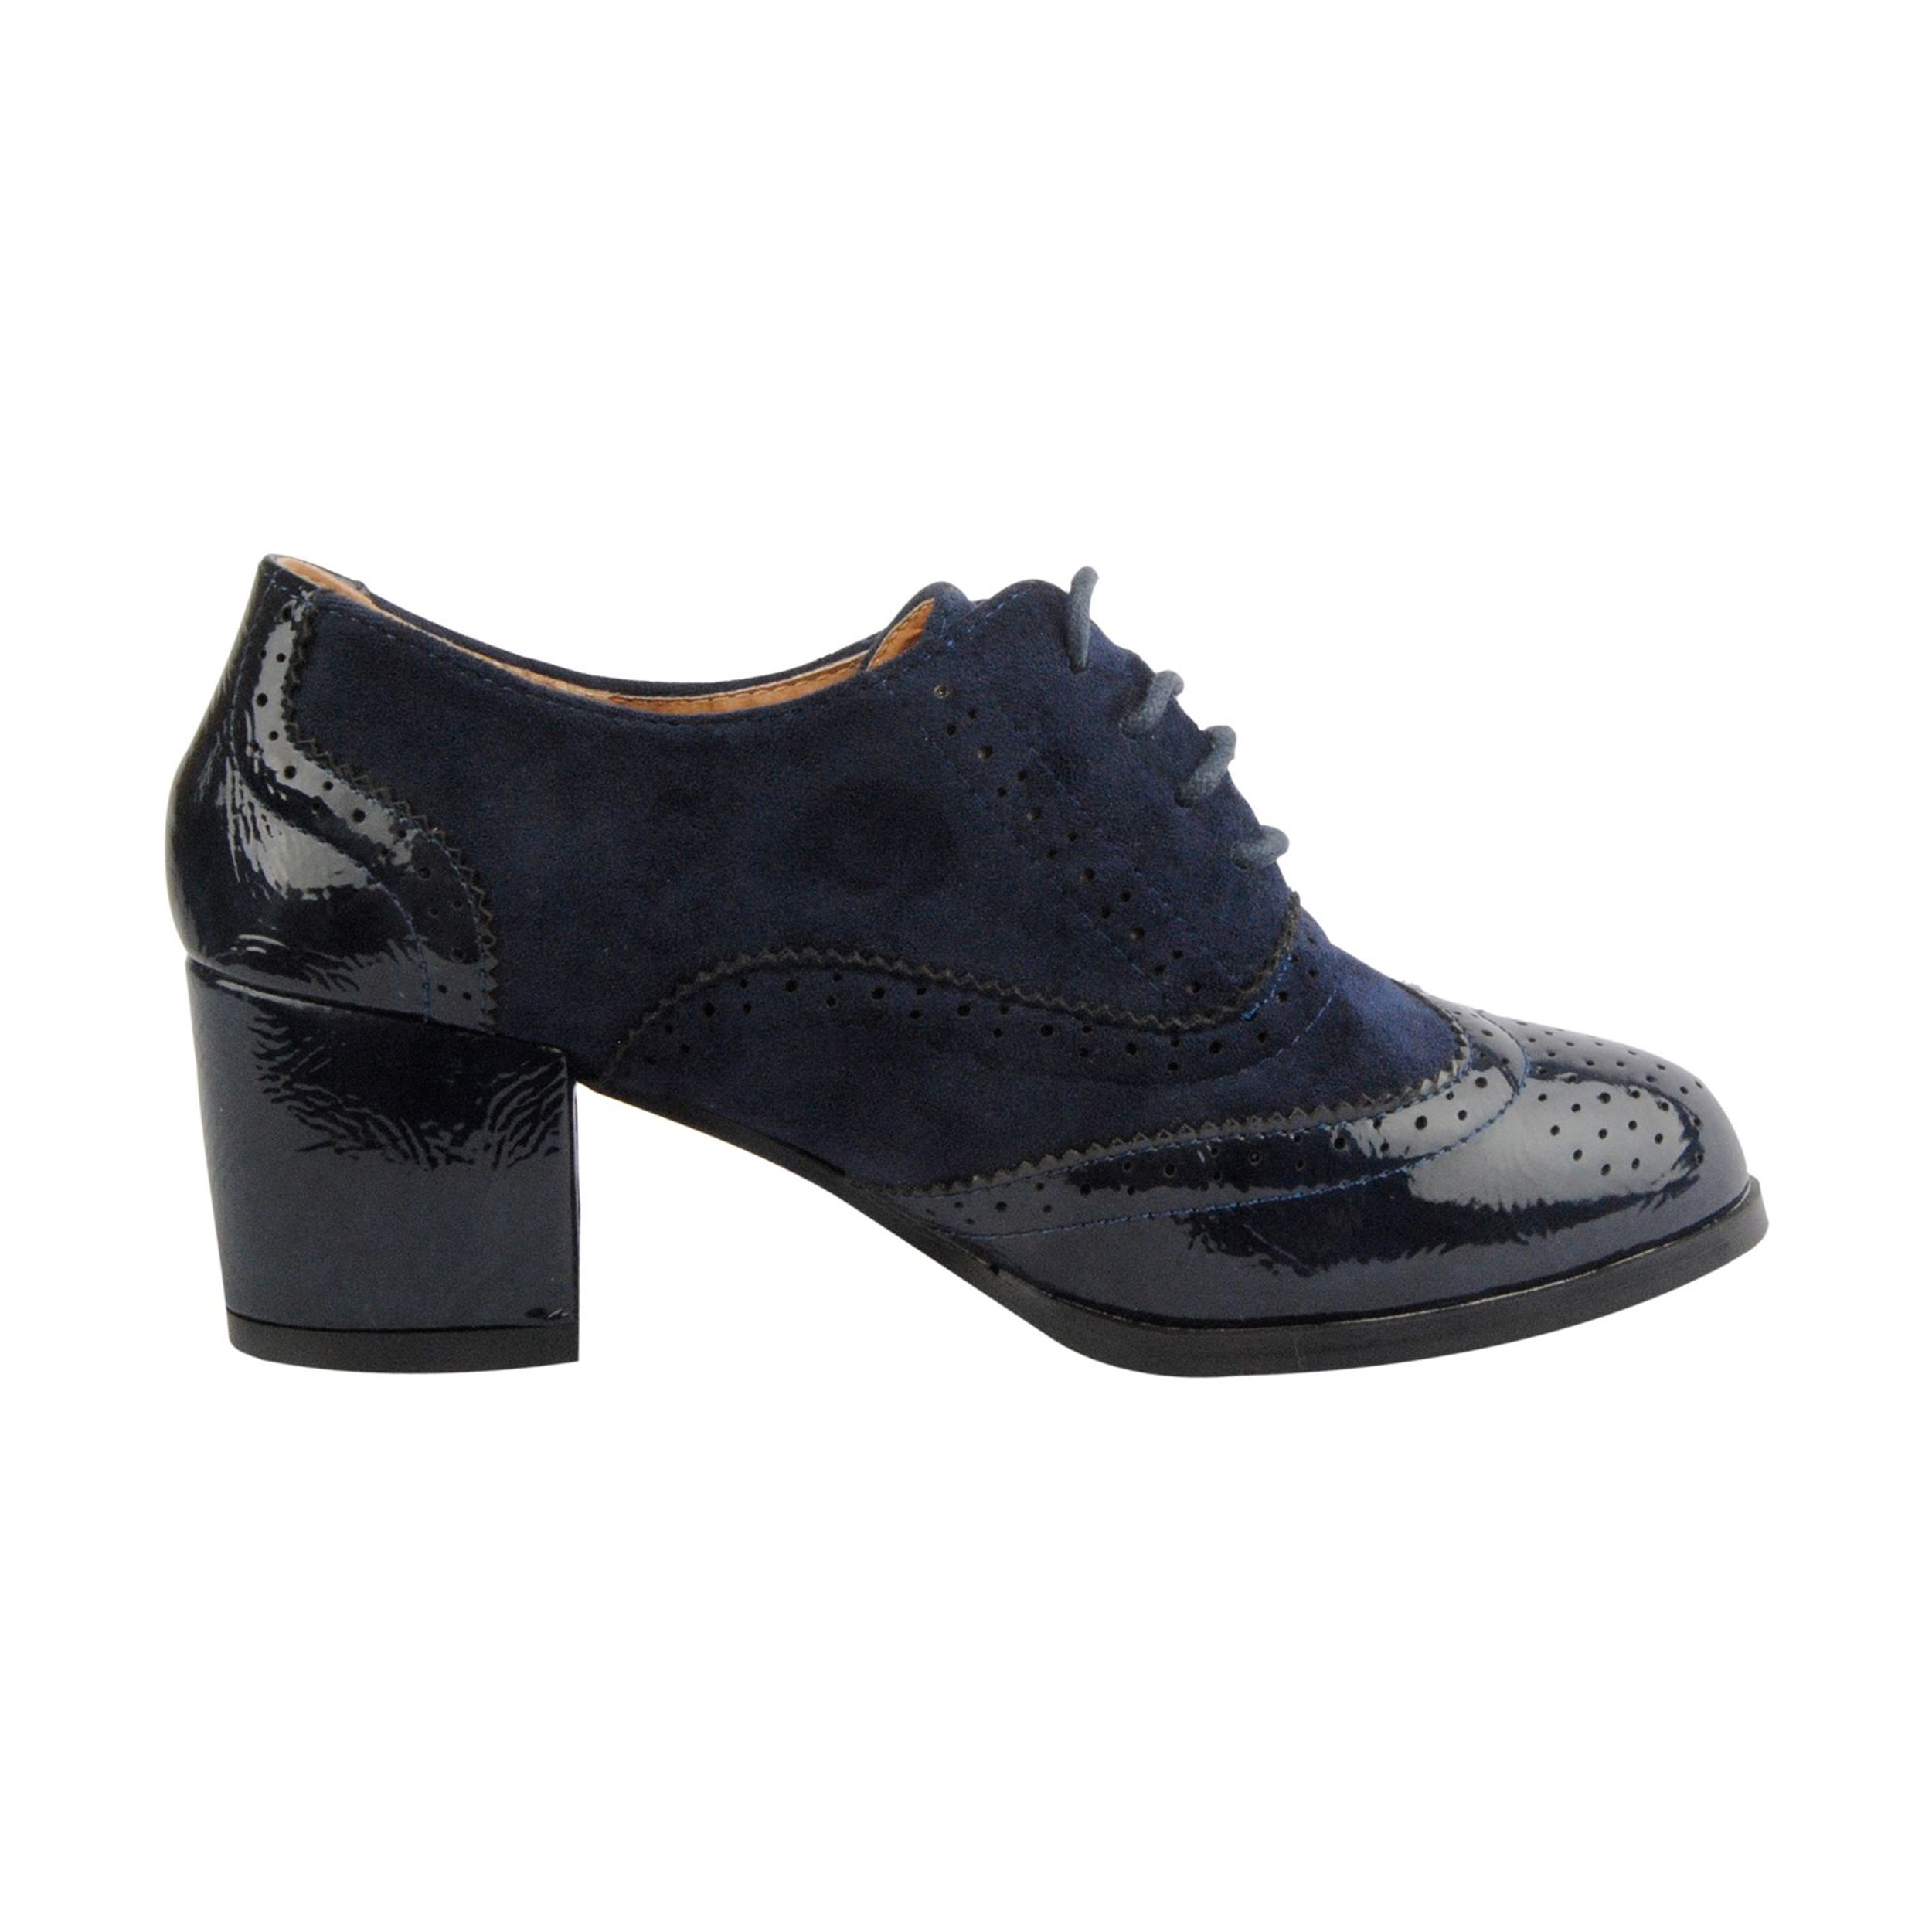 Oxford of wide and comfortable heels. Lace closure. Anti-slip rubber floor. Interior exterior and synthetic template.